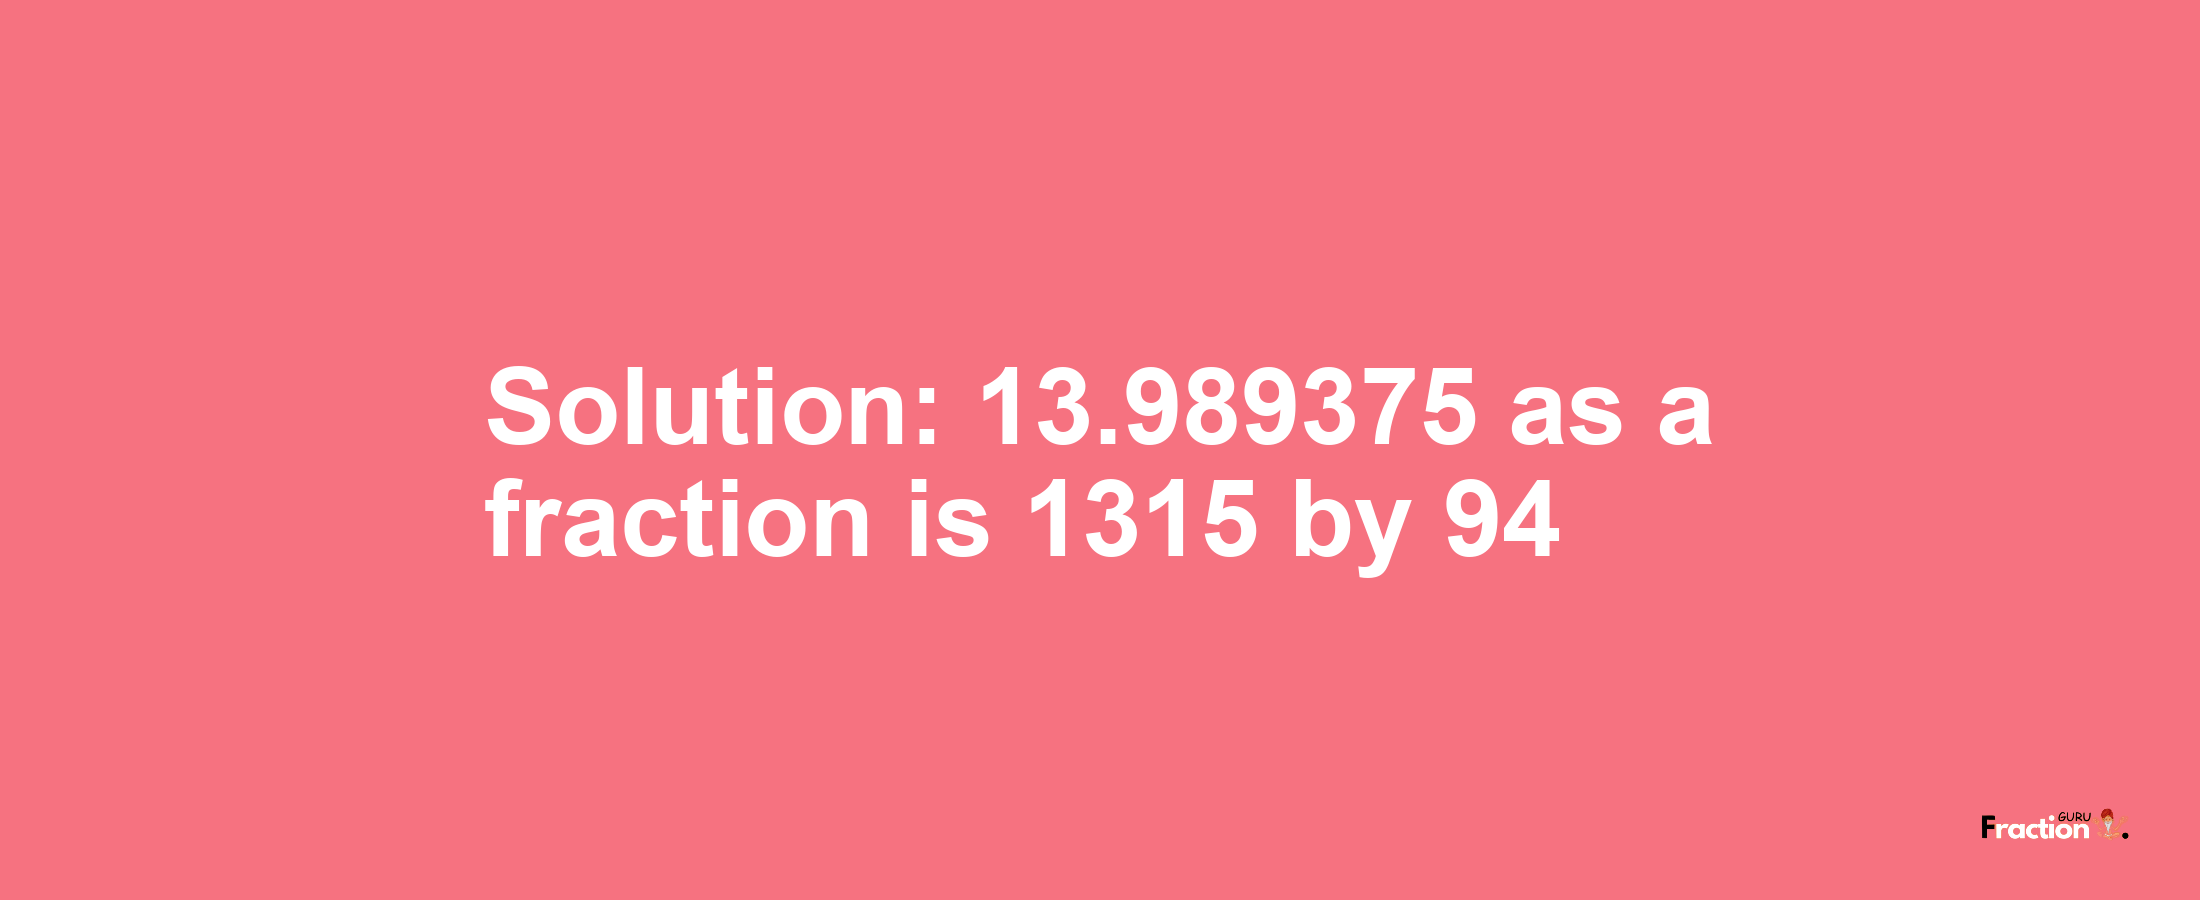 Solution:13.989375 as a fraction is 1315/94